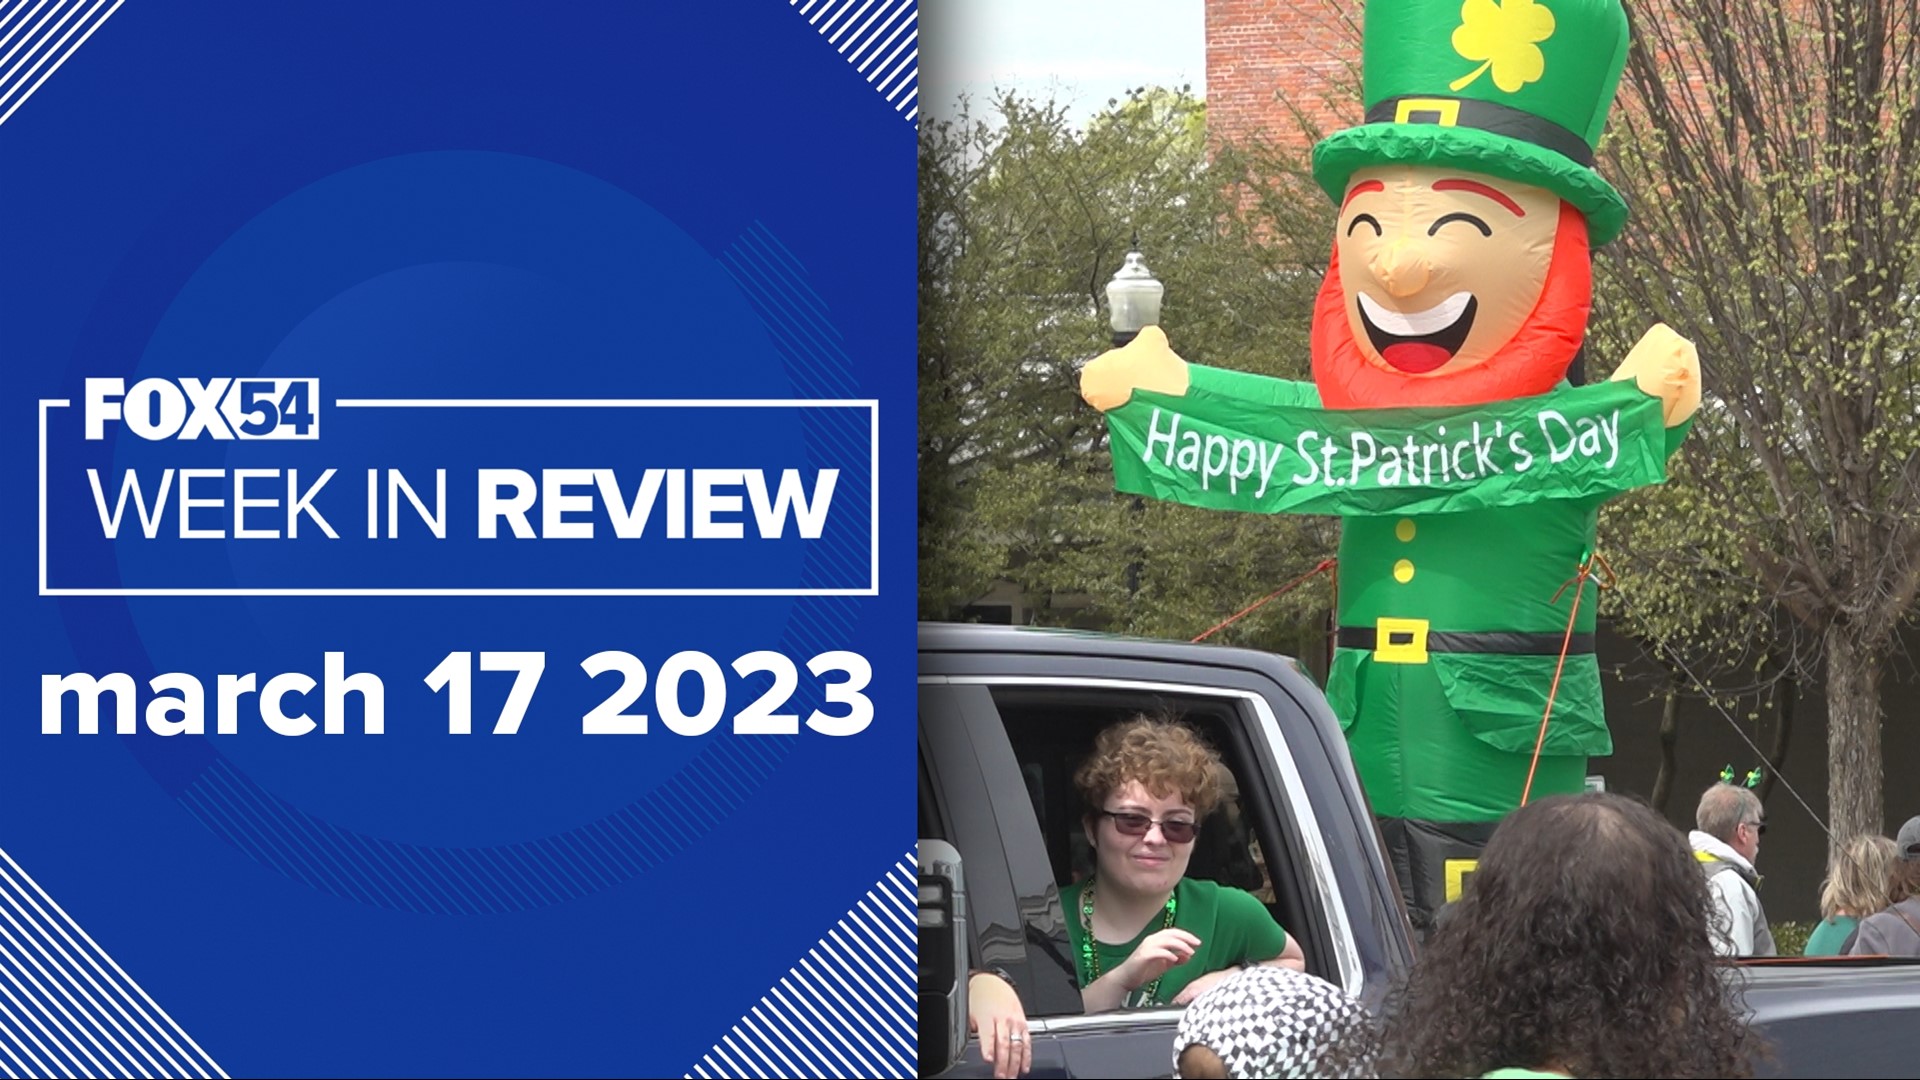 From the debut of Alabama's biggest Ferris wheel to an early St. Patrick's Day parade, this is North Alabama at its Best from March 10-16, 2023.